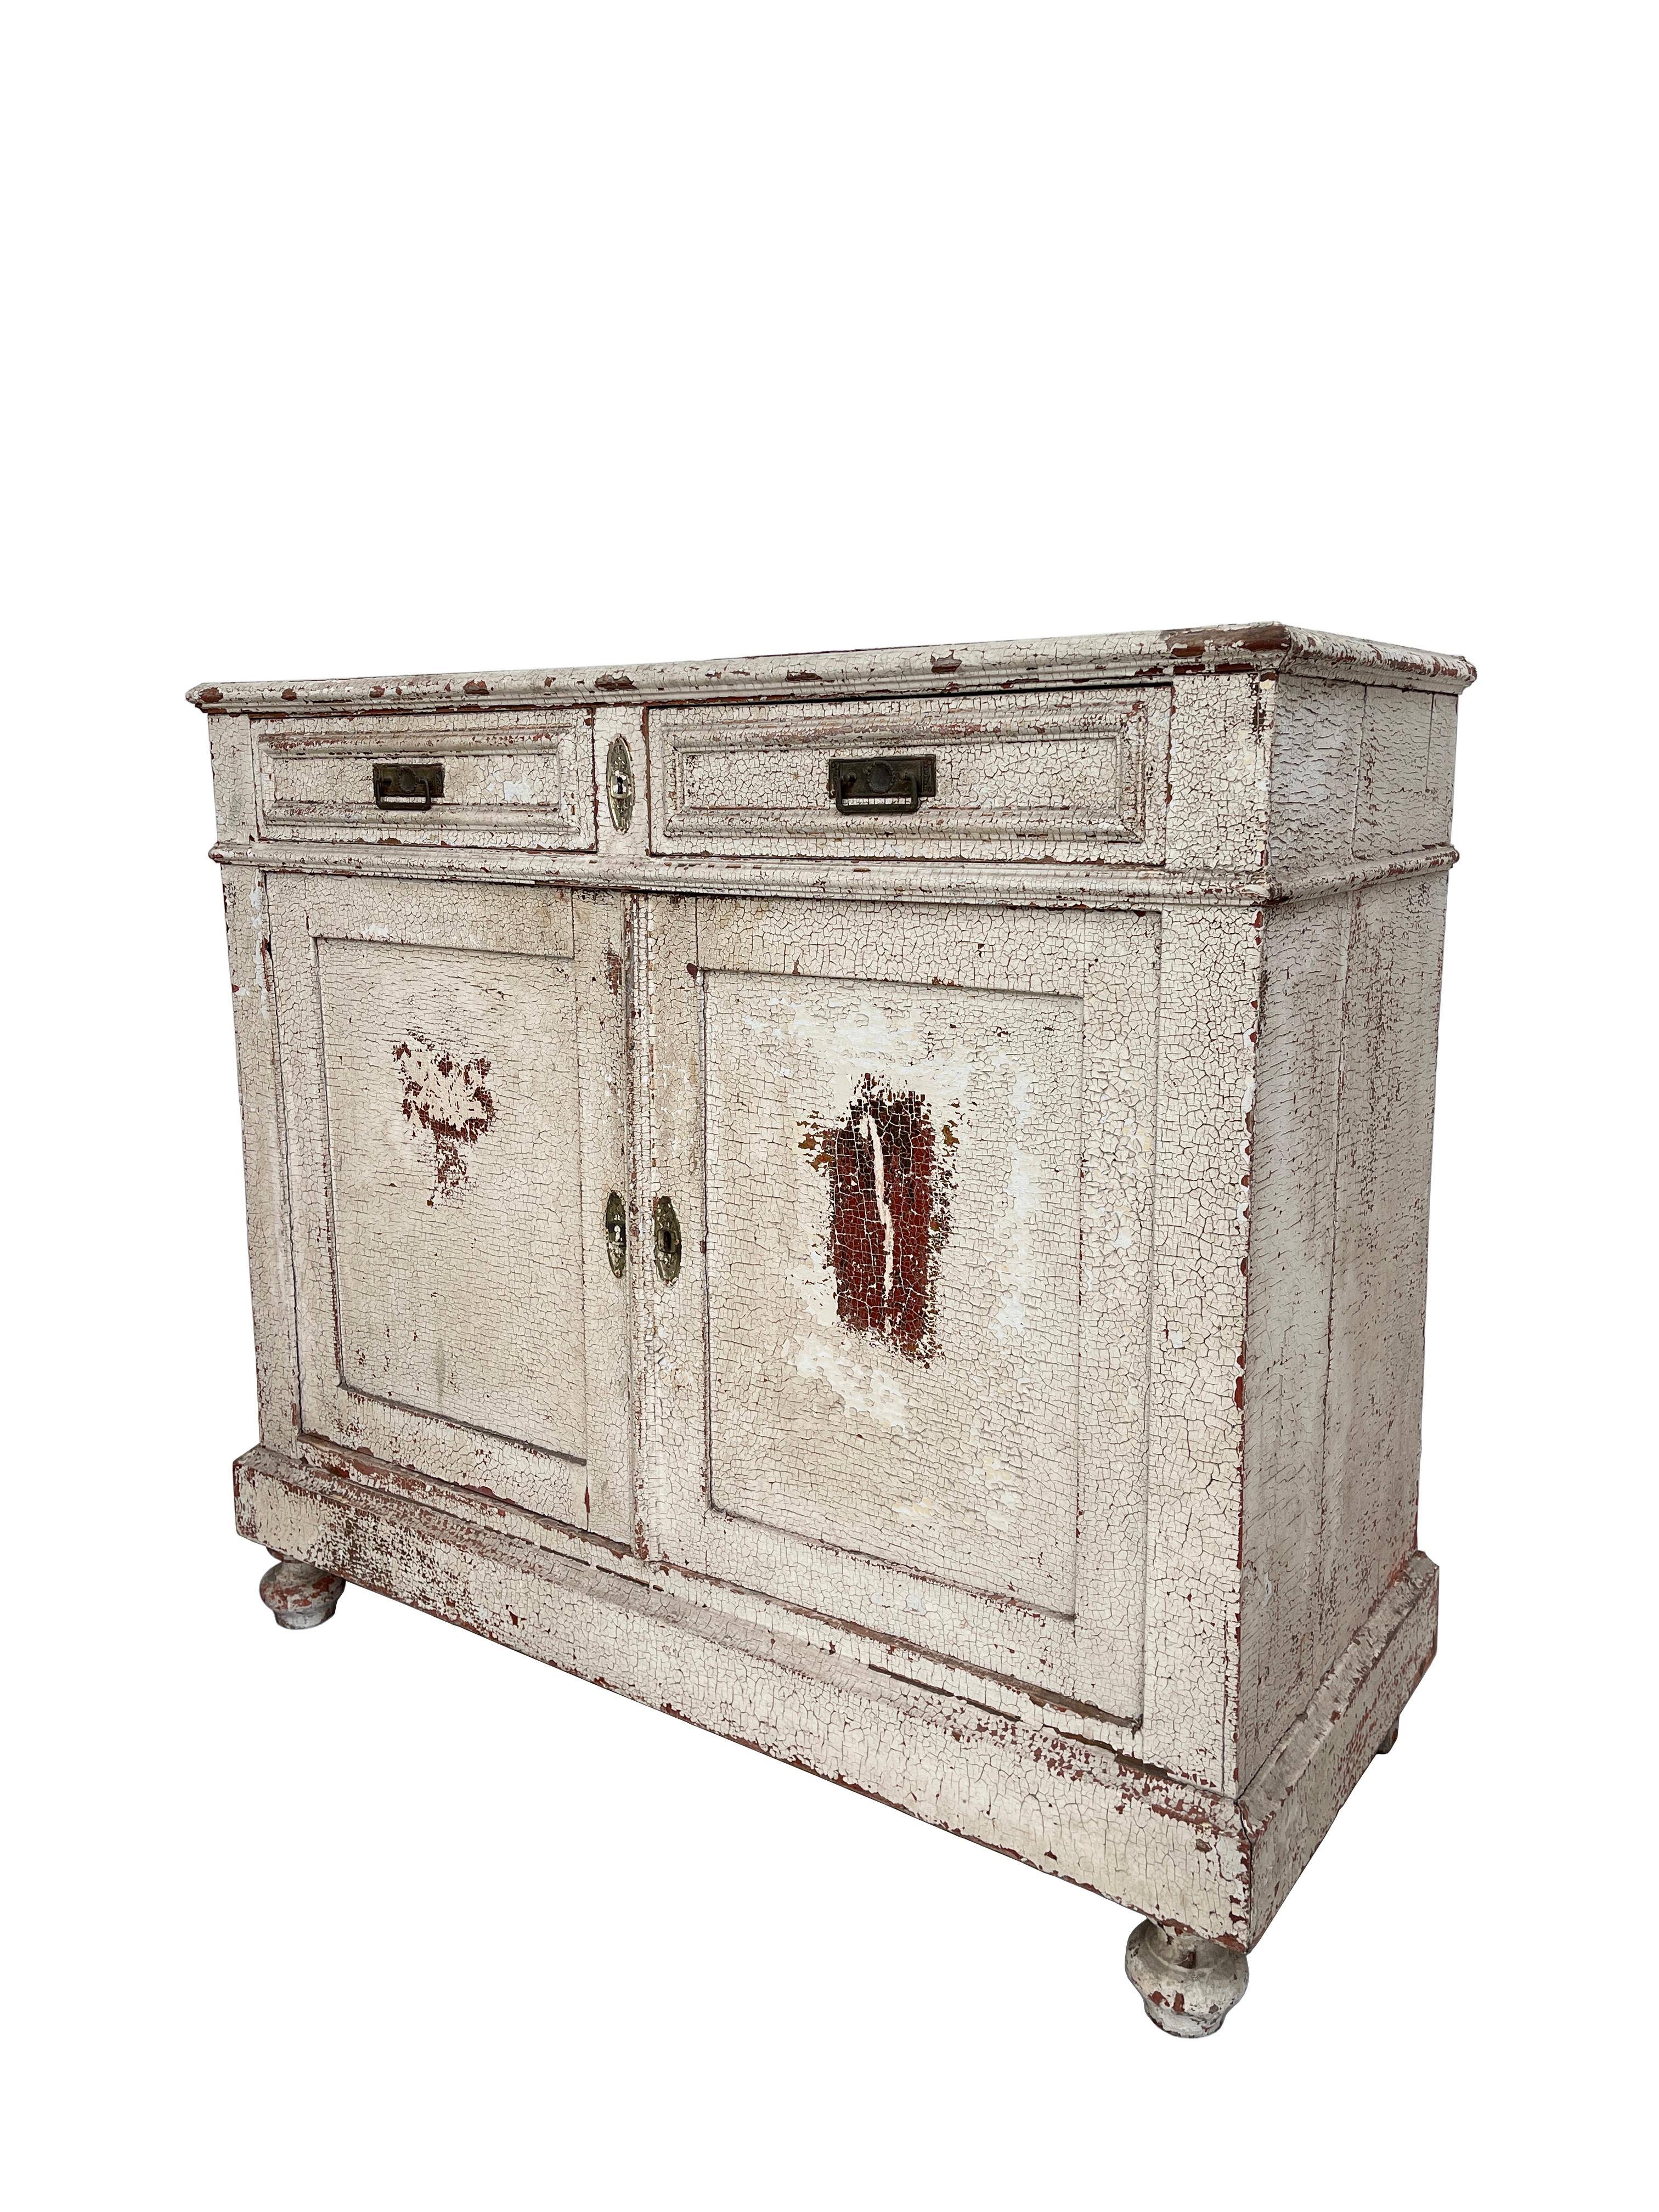 - A beautiful 19th century French painted credenza cabinet. 
- The cabinet has been repainted over the course of its life which has resulted in the most original incredible age worn finish. 
- Raised on scrolling legs the cabinet features two